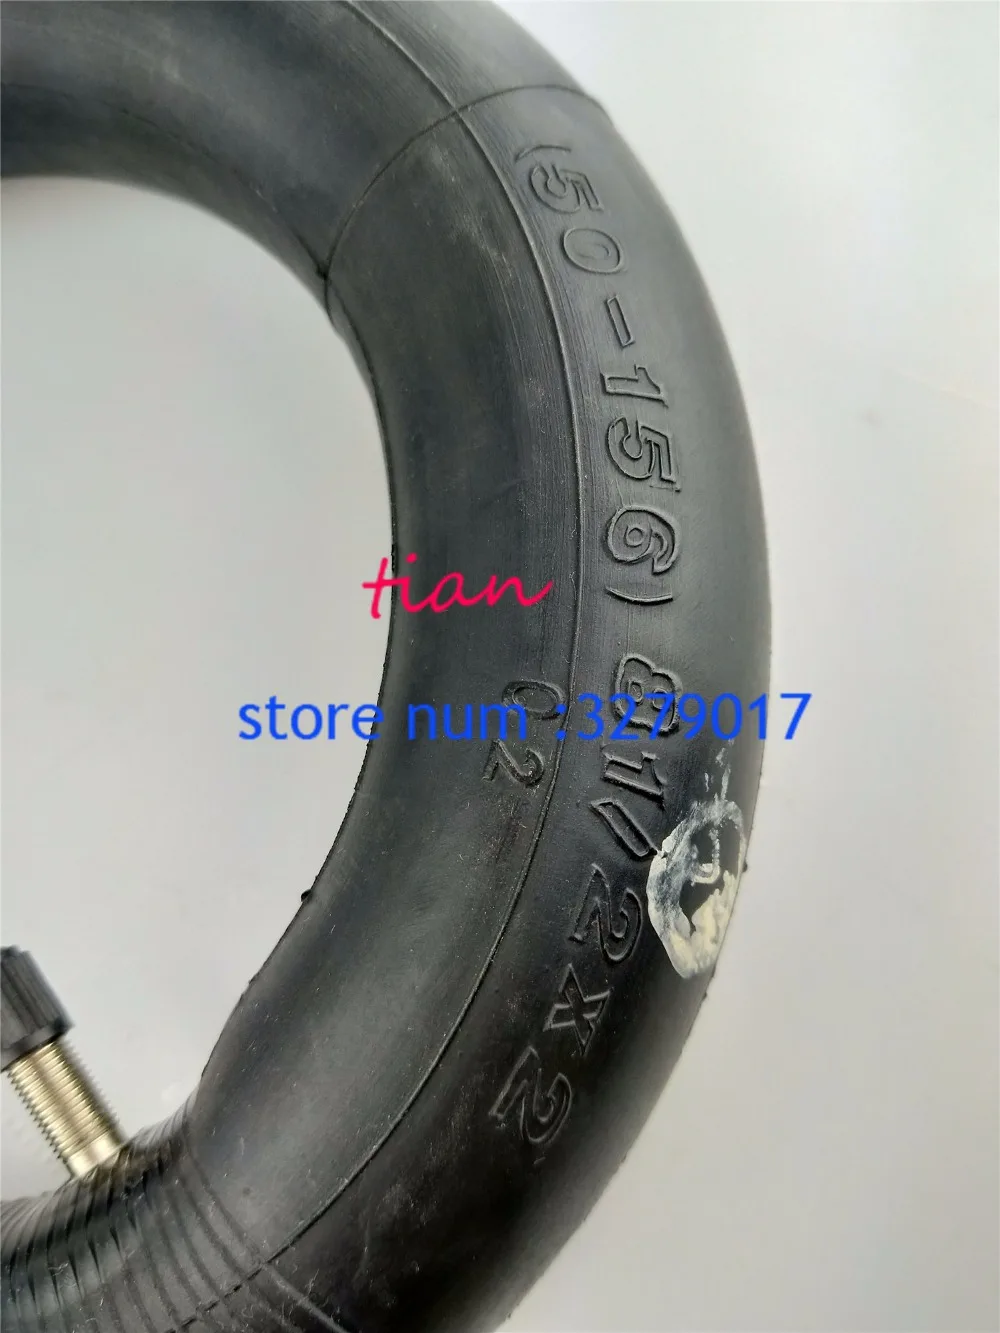 

2pc Inner Tubes Pneumatic Tires fit Xiaomi Mijia M365 Electric Scooter 8 1/2x2 Upgraded Version Durable Thick Wheel Tyre